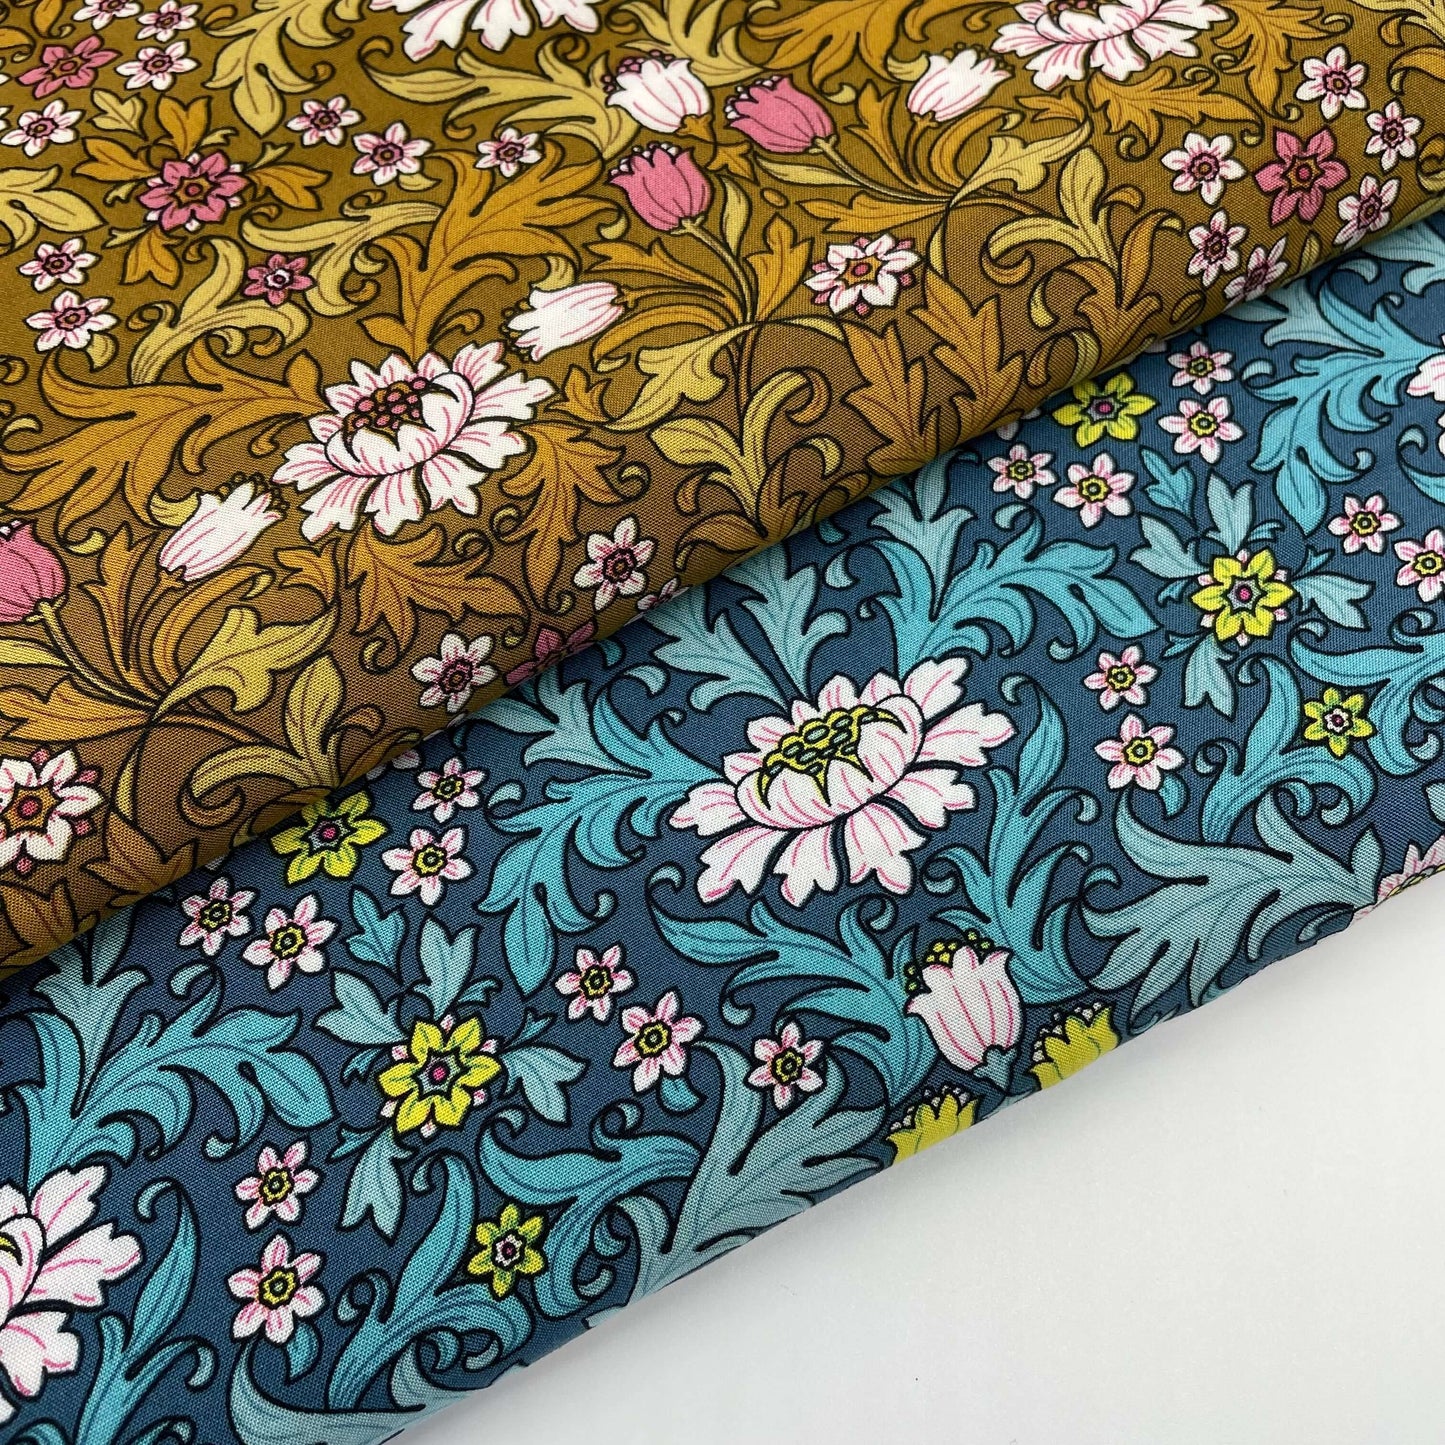 William Morris-style fabrics, one in yellow and one in blue. Flowers and leaves print